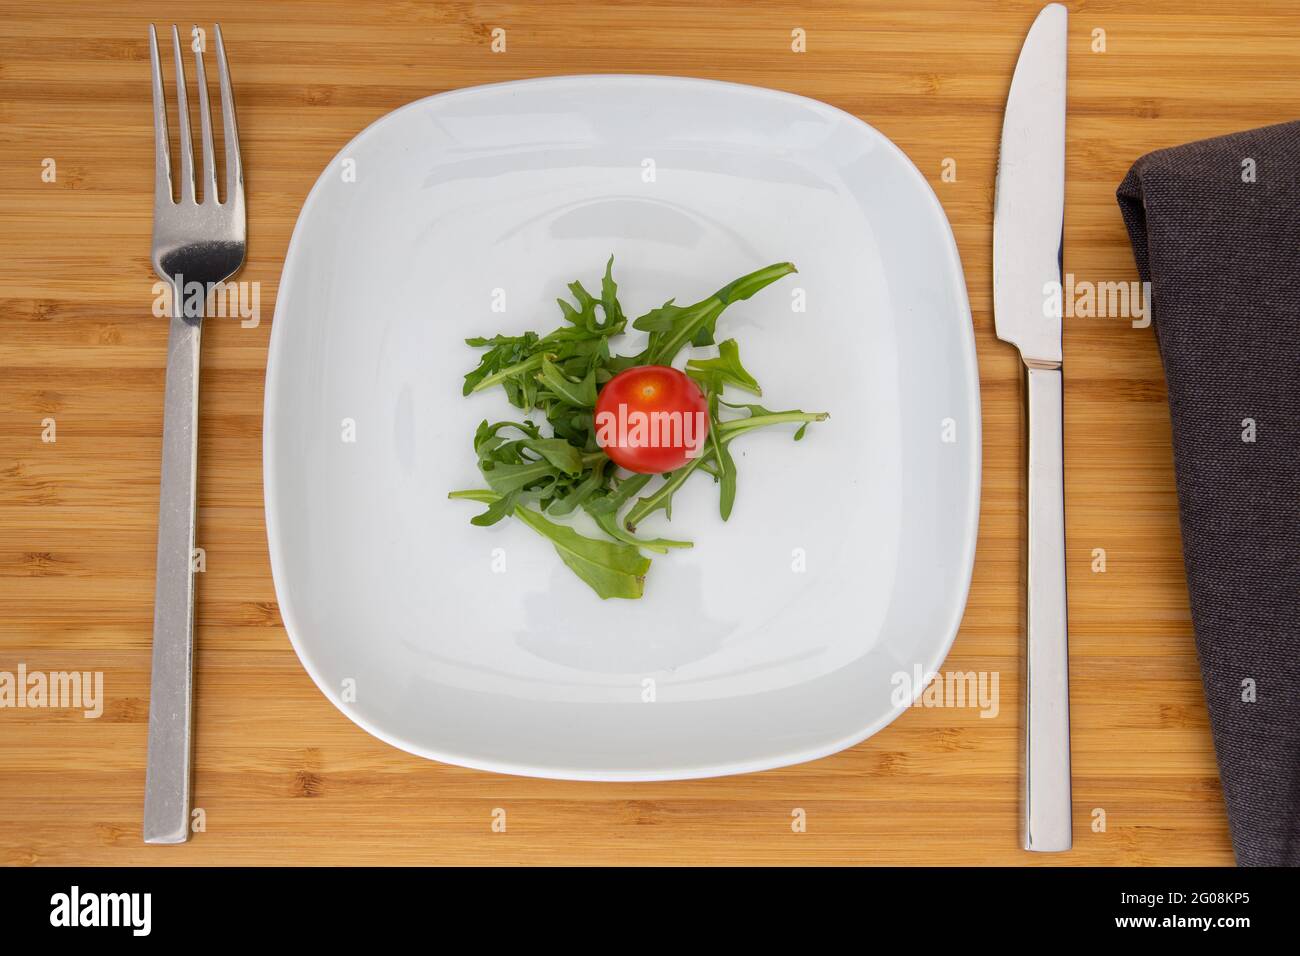 top view of a small portion salad on a white plate with cutlery Stock Photo